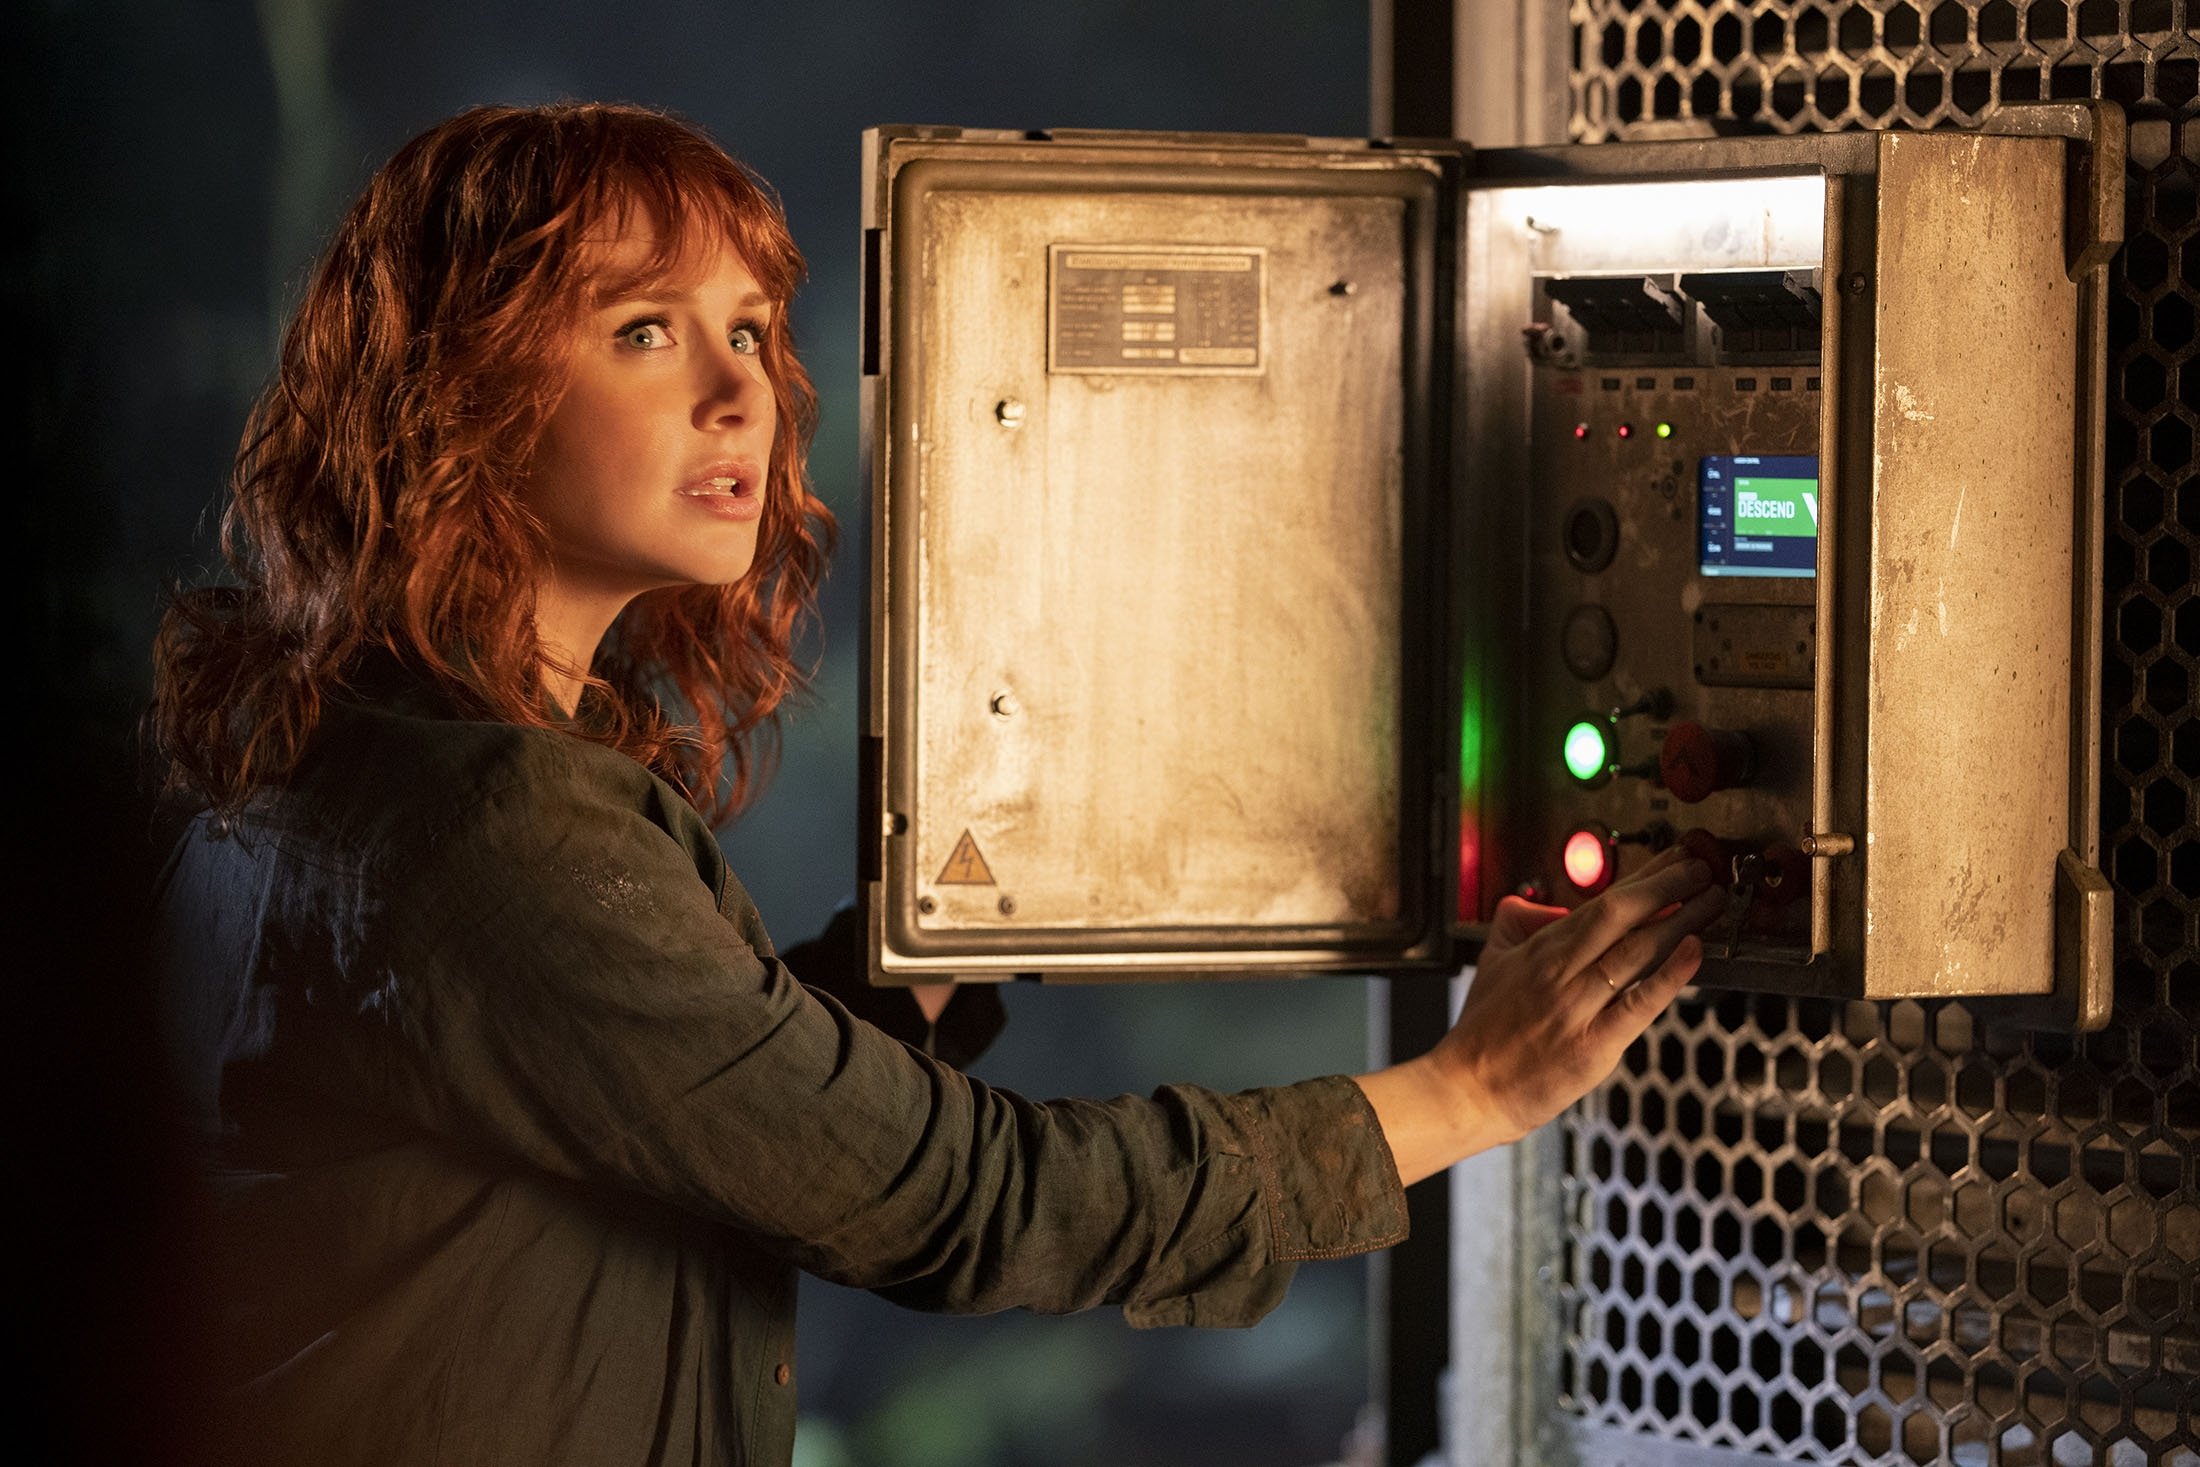 Bryce Dallas Howard in a scene from the film "Jurassic World: Dominion." (Universal Pictures via AP)